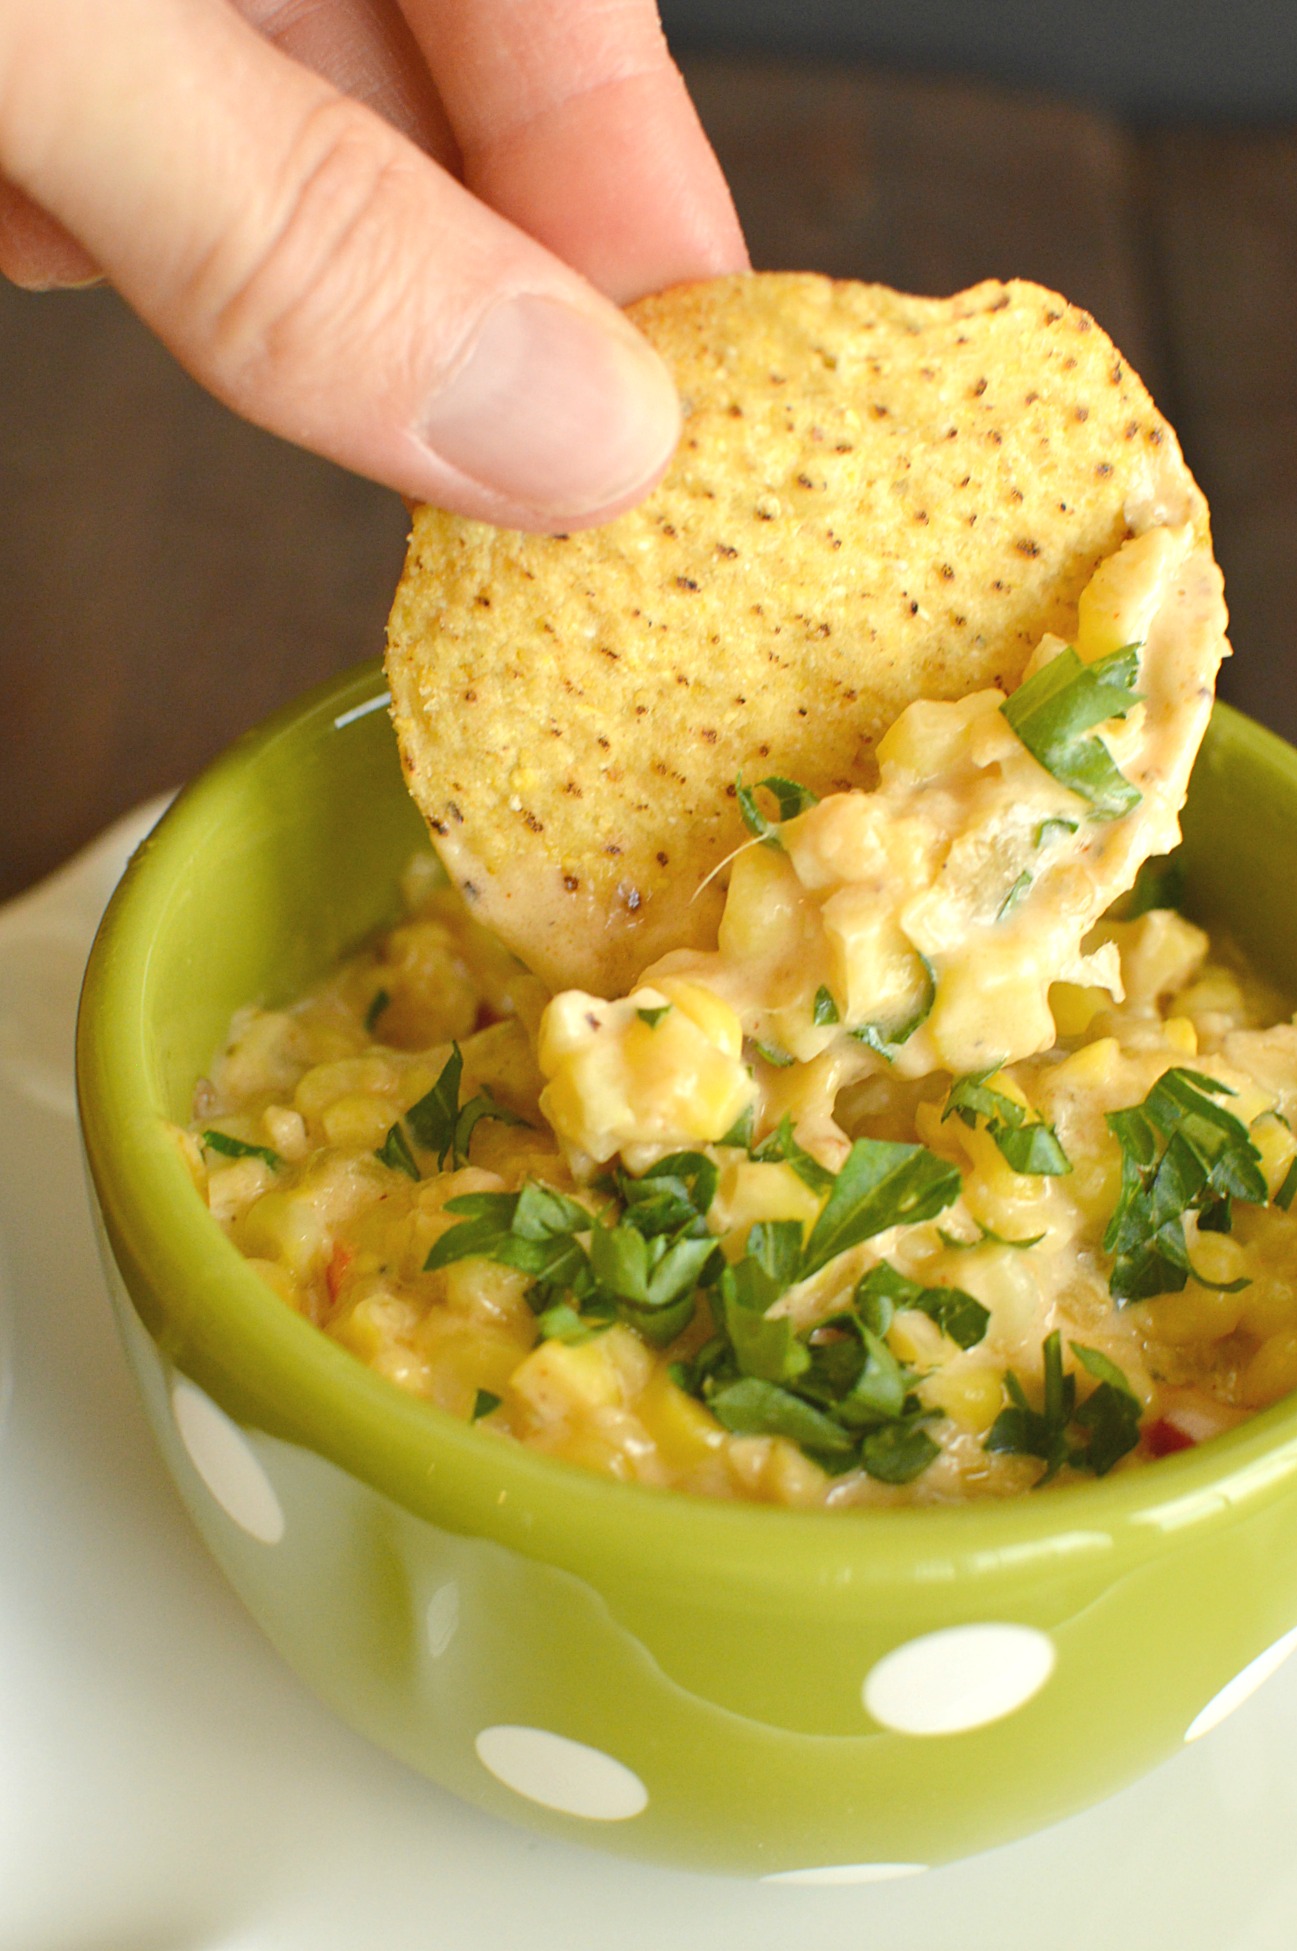 a green bowl with white polka dots with creamy dip made with corn and a tortilla chip dipping into the corn.